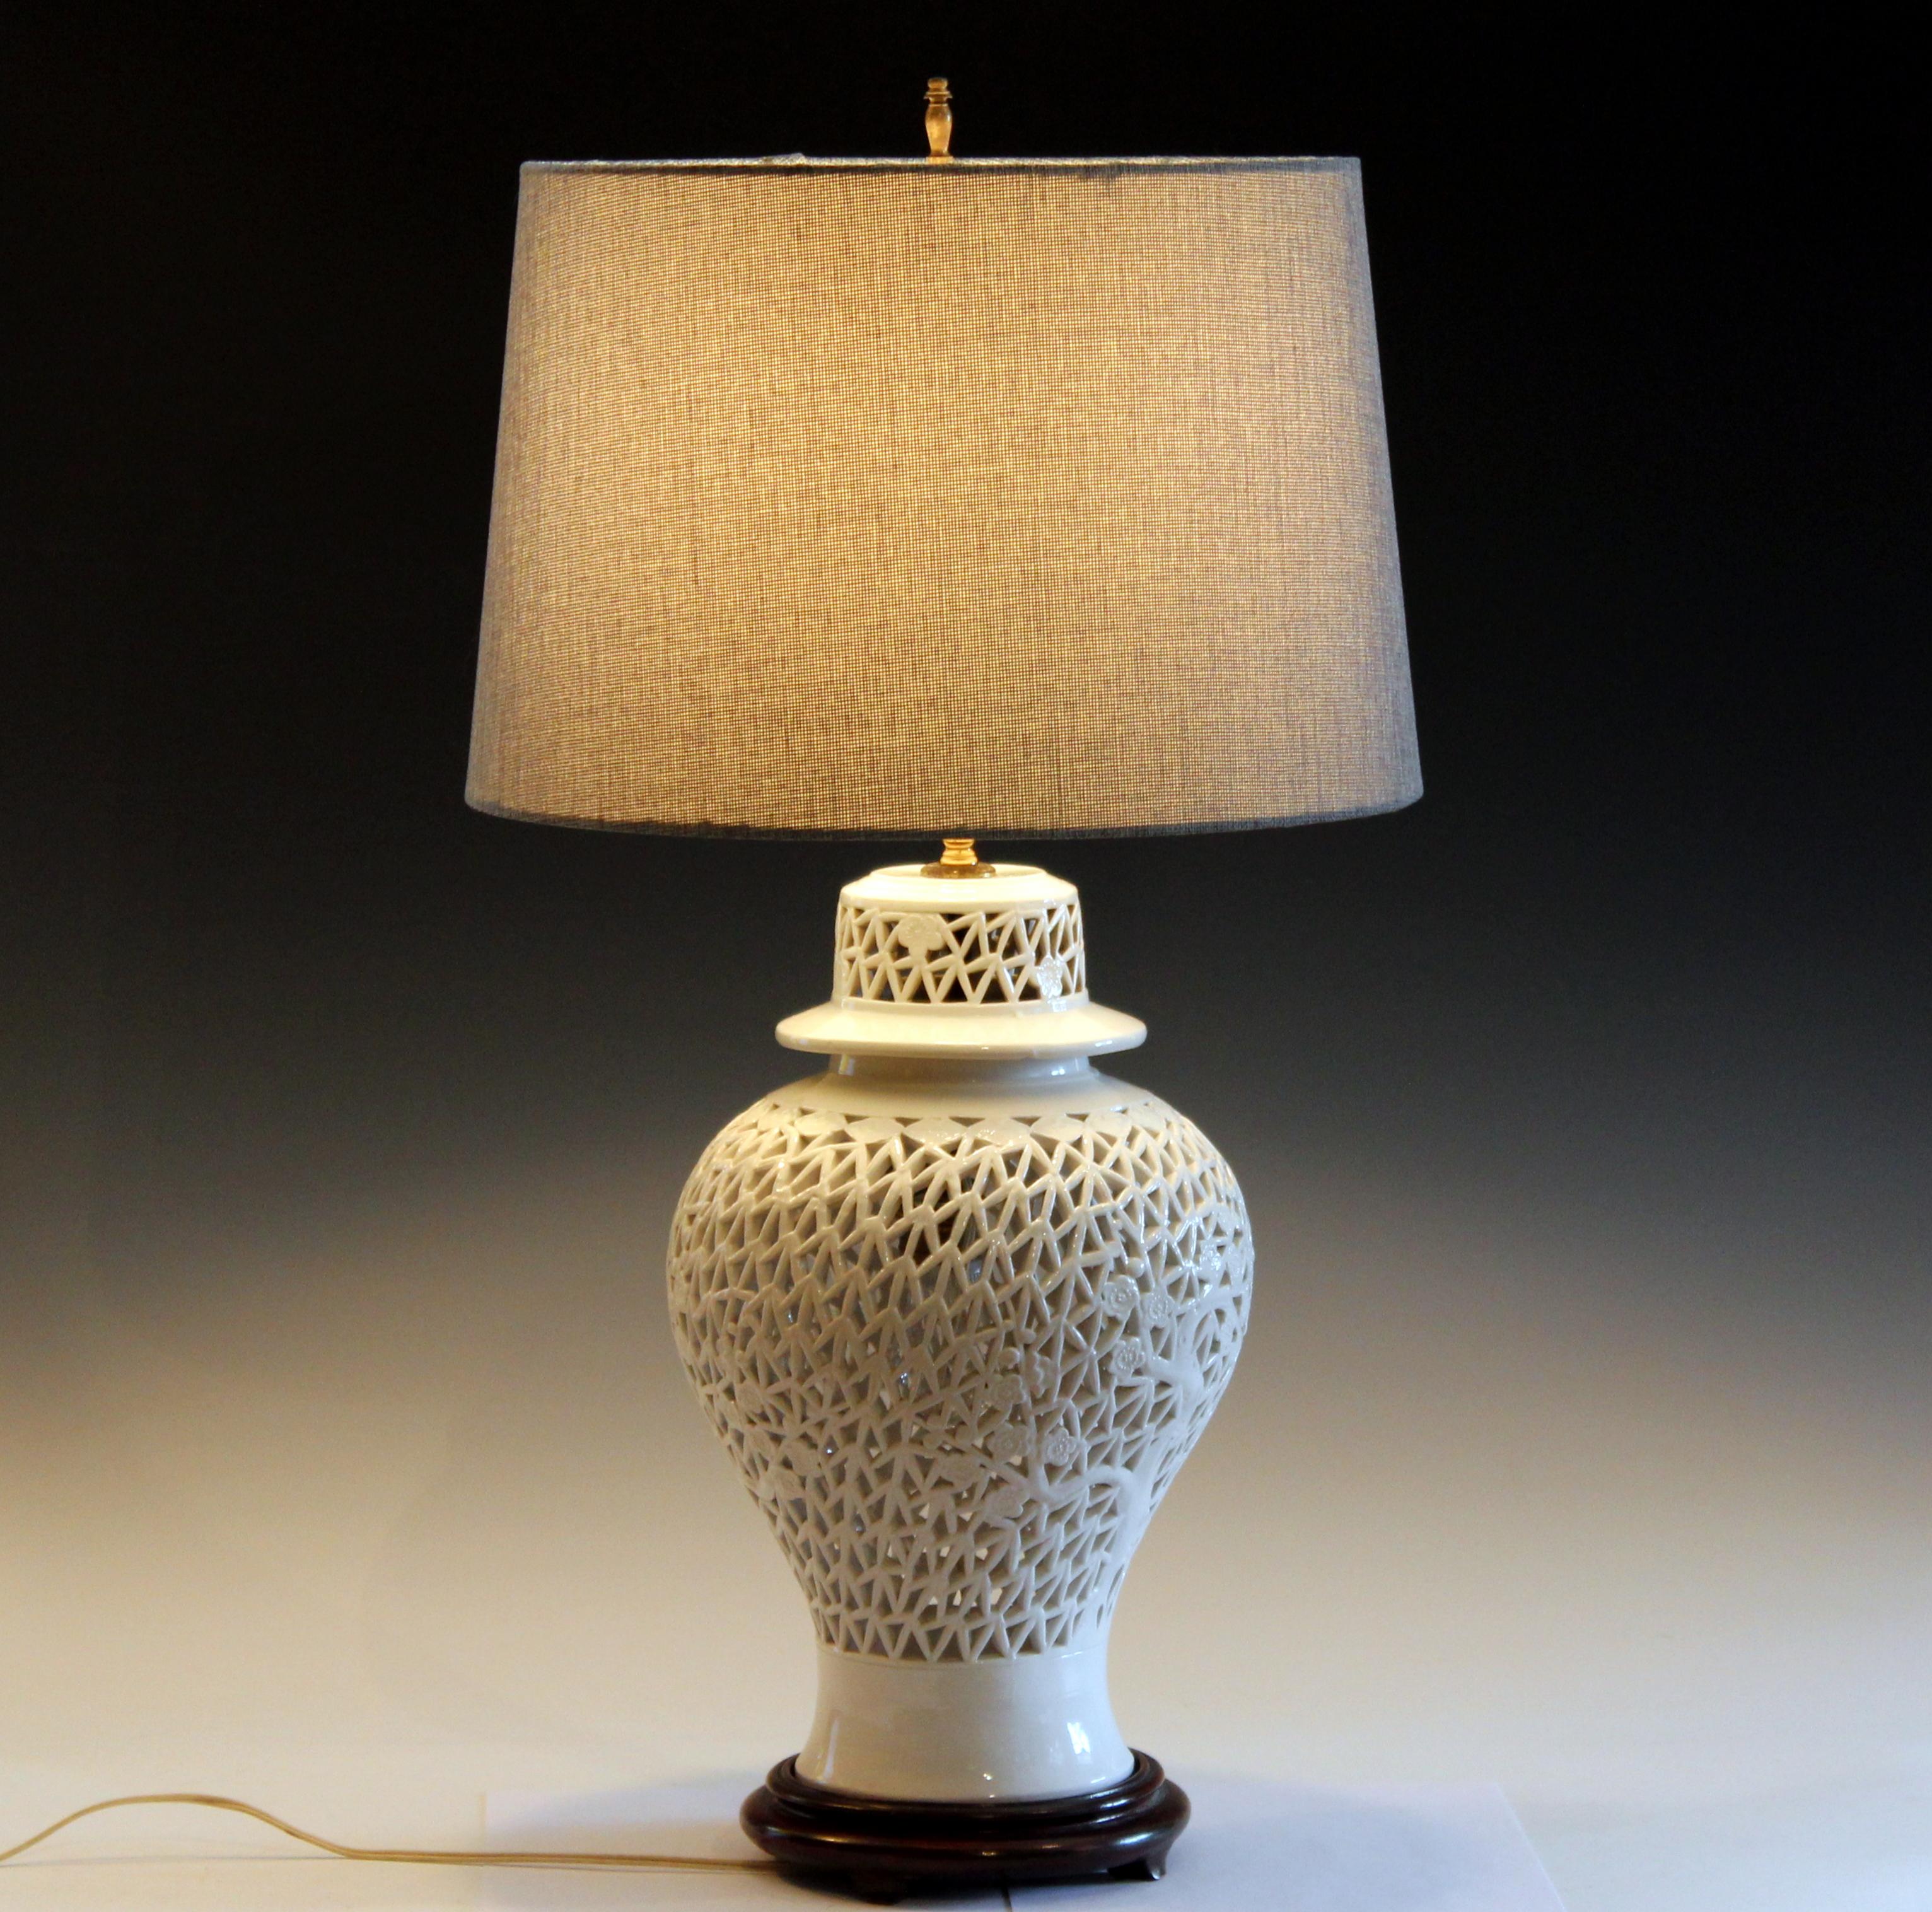 Large old Chinese porcelain carved Blanc de Chine lamp with inner bulb, circa early 20th century. Good design with finely carved openwork. 3 way switch. Measures: 28